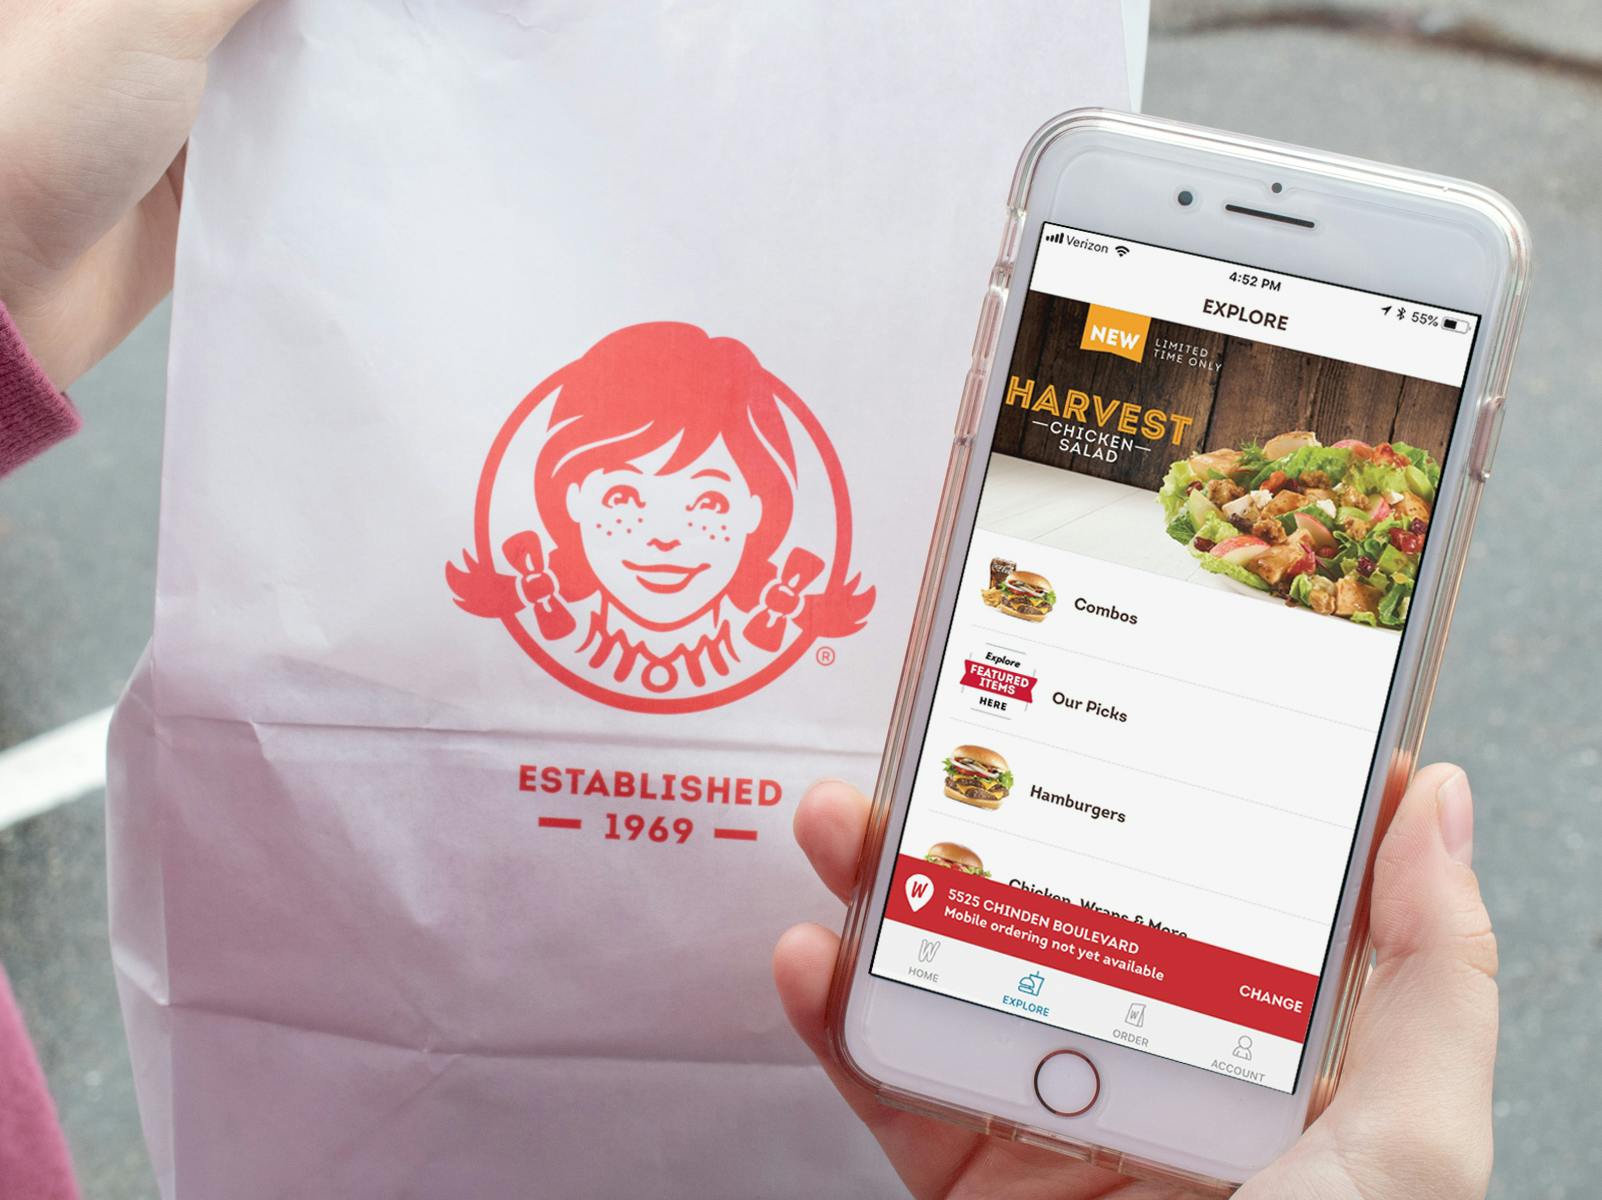 Someone holding a Wendy's takeout bag next to an iPhone displaying the Wendy's mobile app.